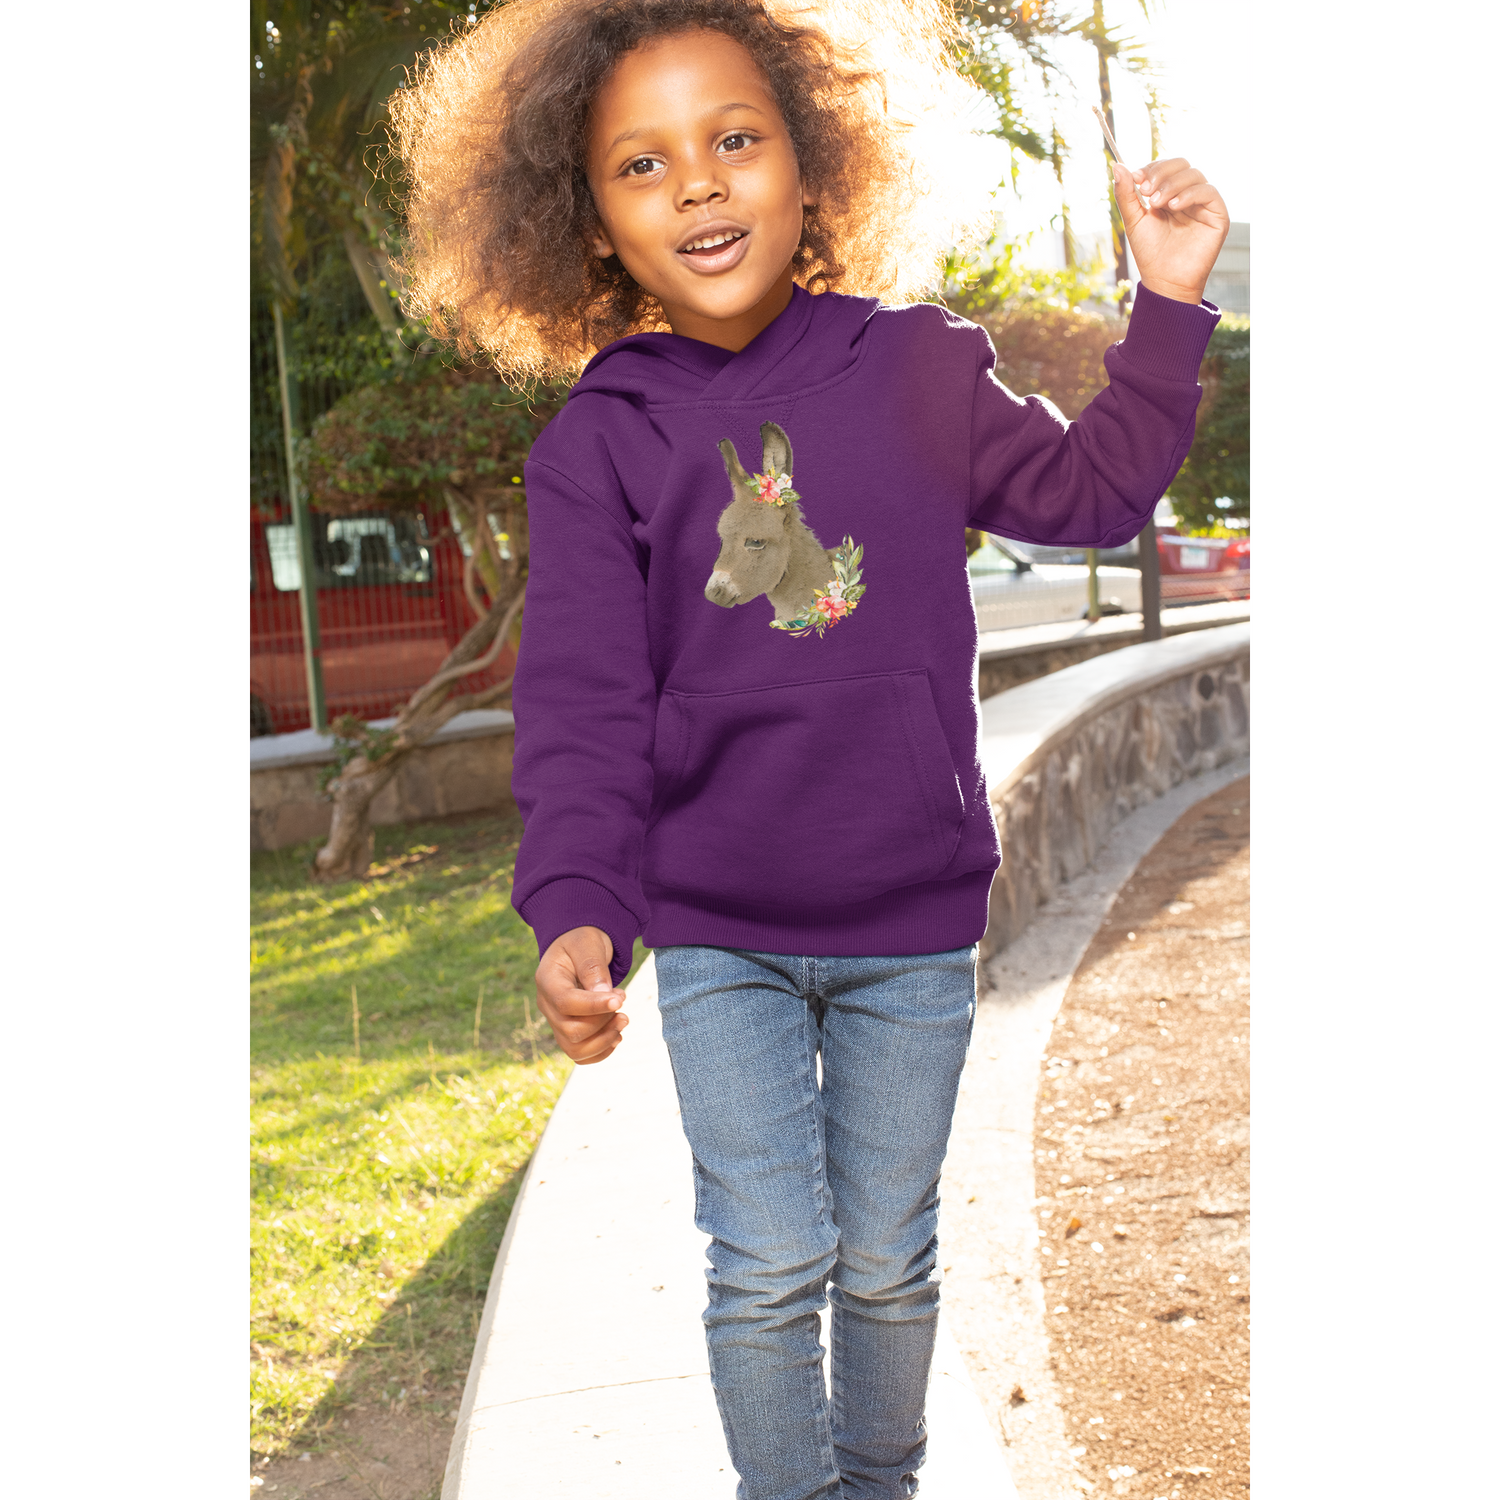 Girl wearing purple hoodie with Baby Donkey graphic